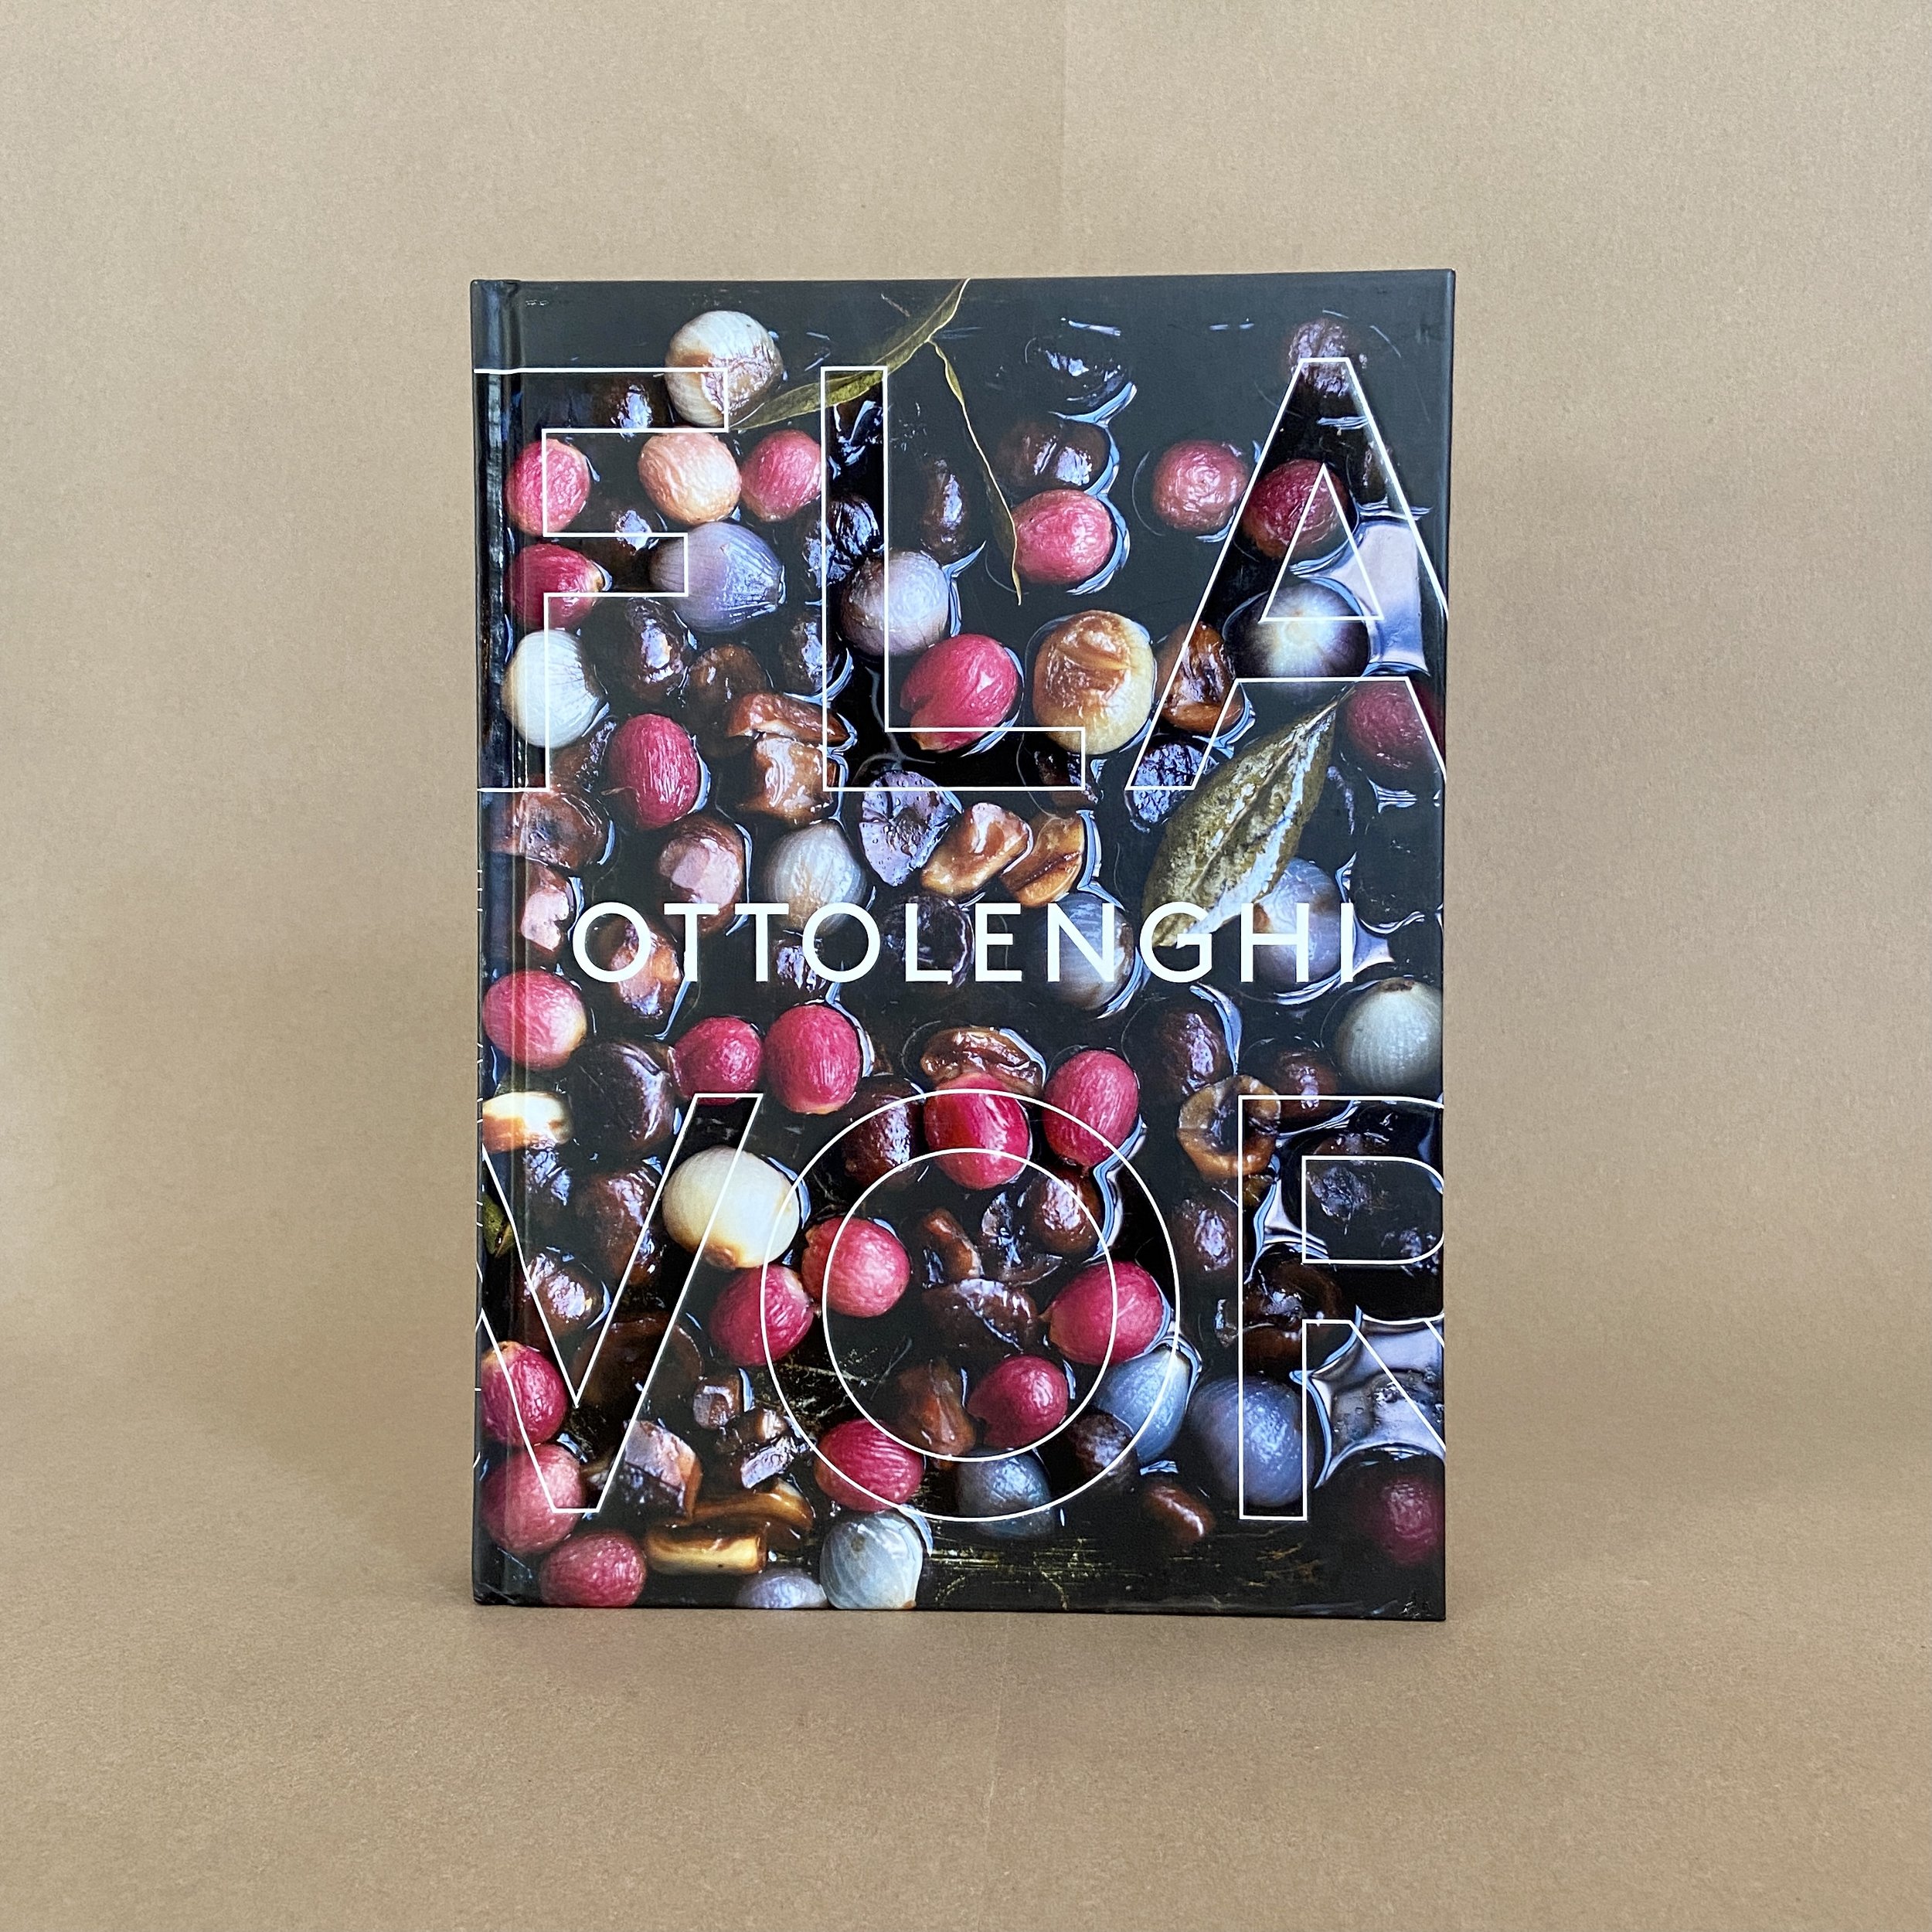 Flavor by Ottolenghi